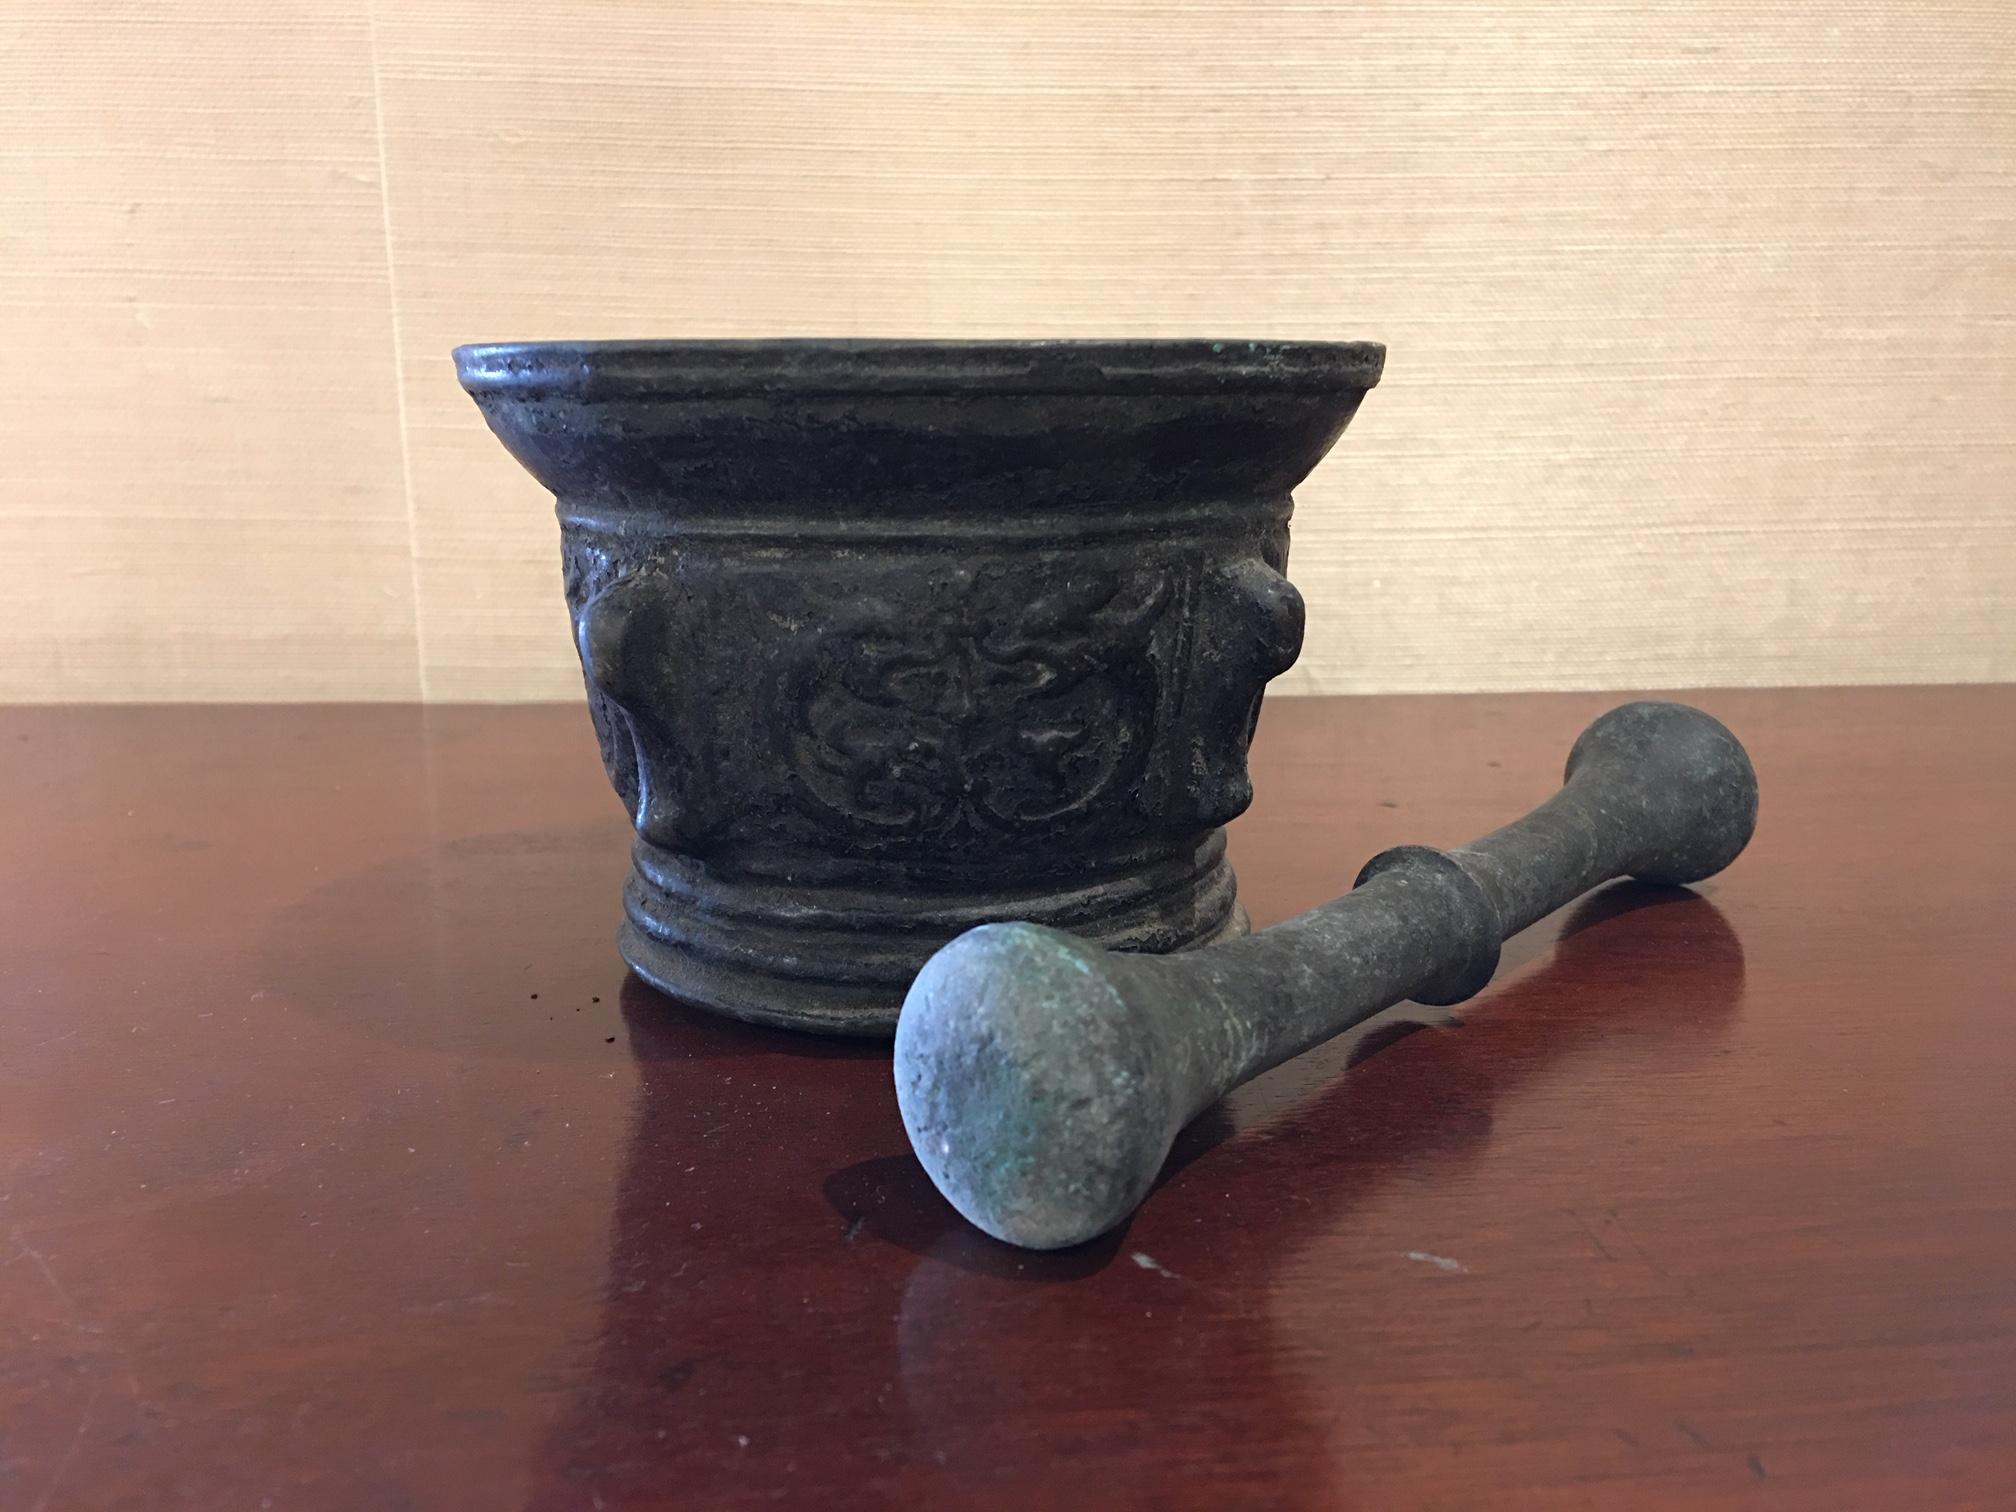 French bronze mortar and pestle, original patina, early 19th century. Pharmacy or herbalist antique bronze mortar. Handmade with pestle. Original patina.